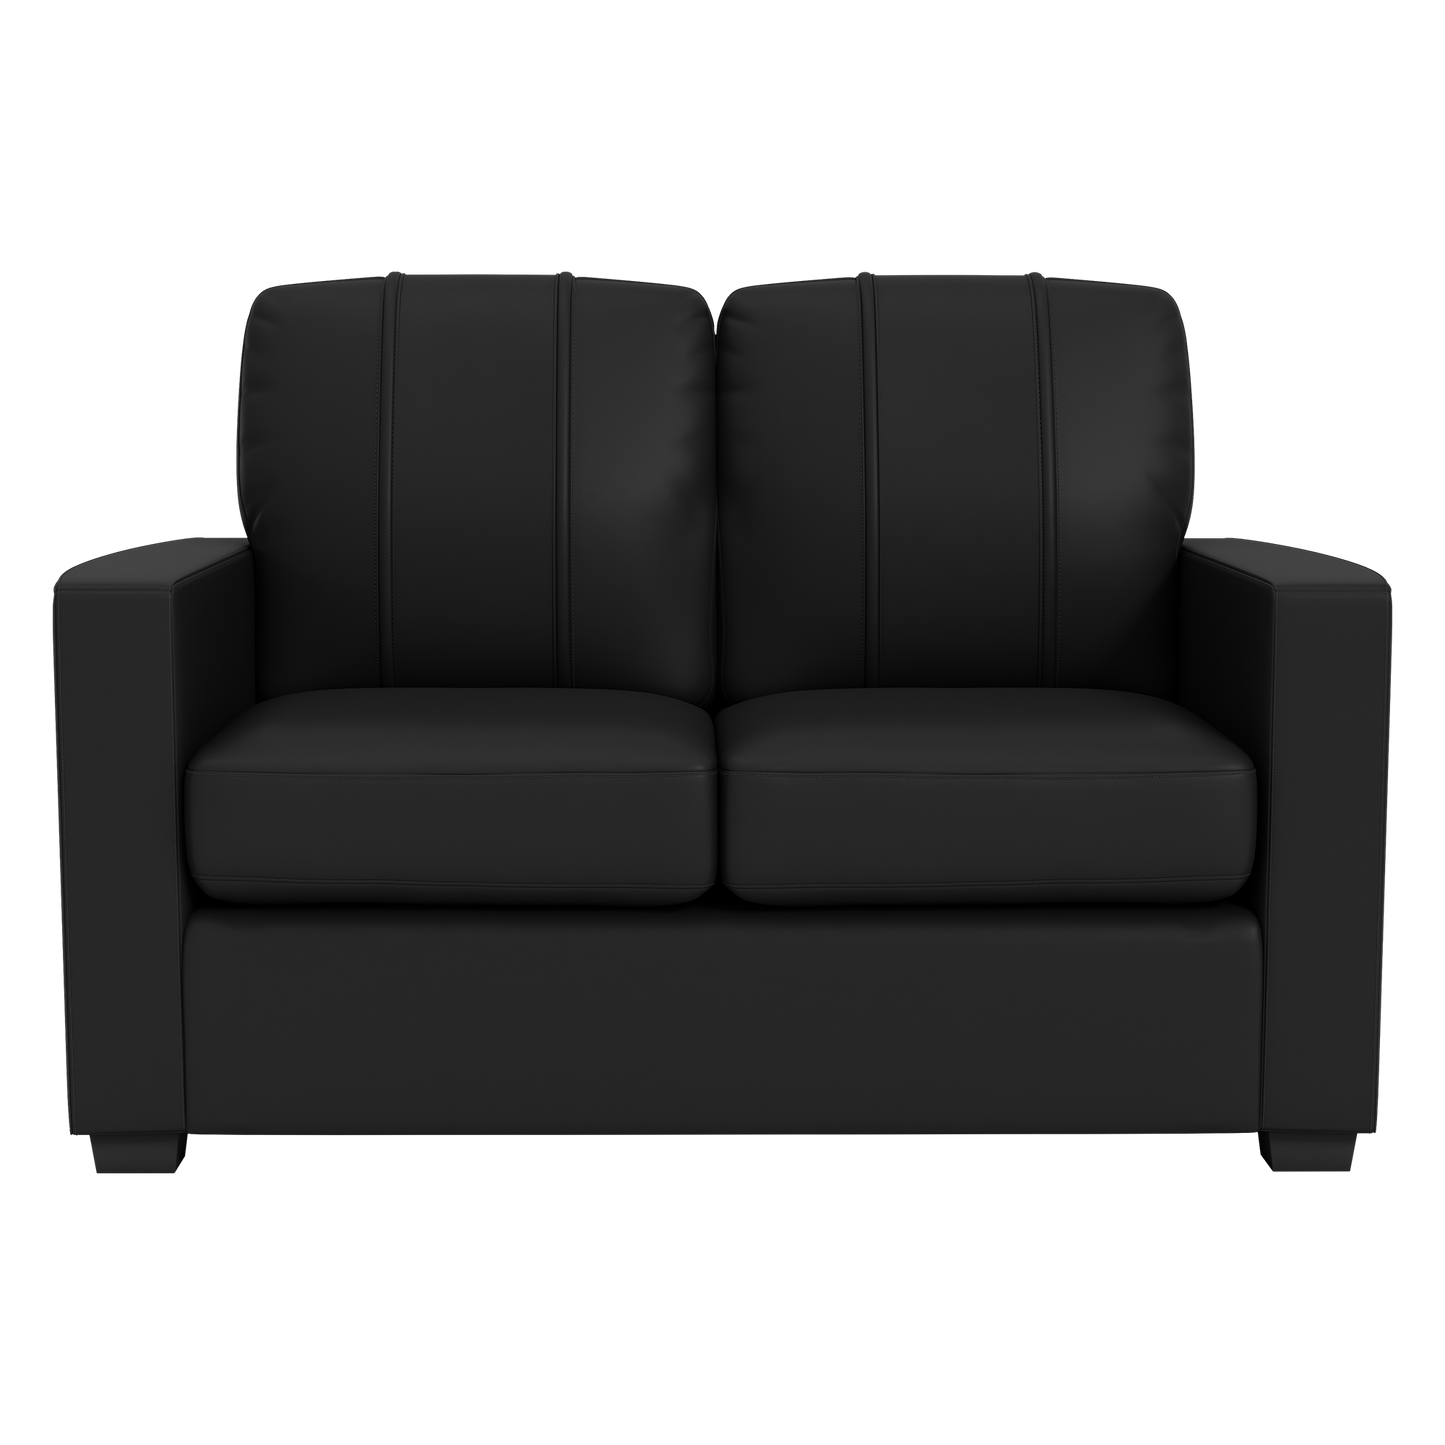 Silver Loveseat with New York Mets Secondary